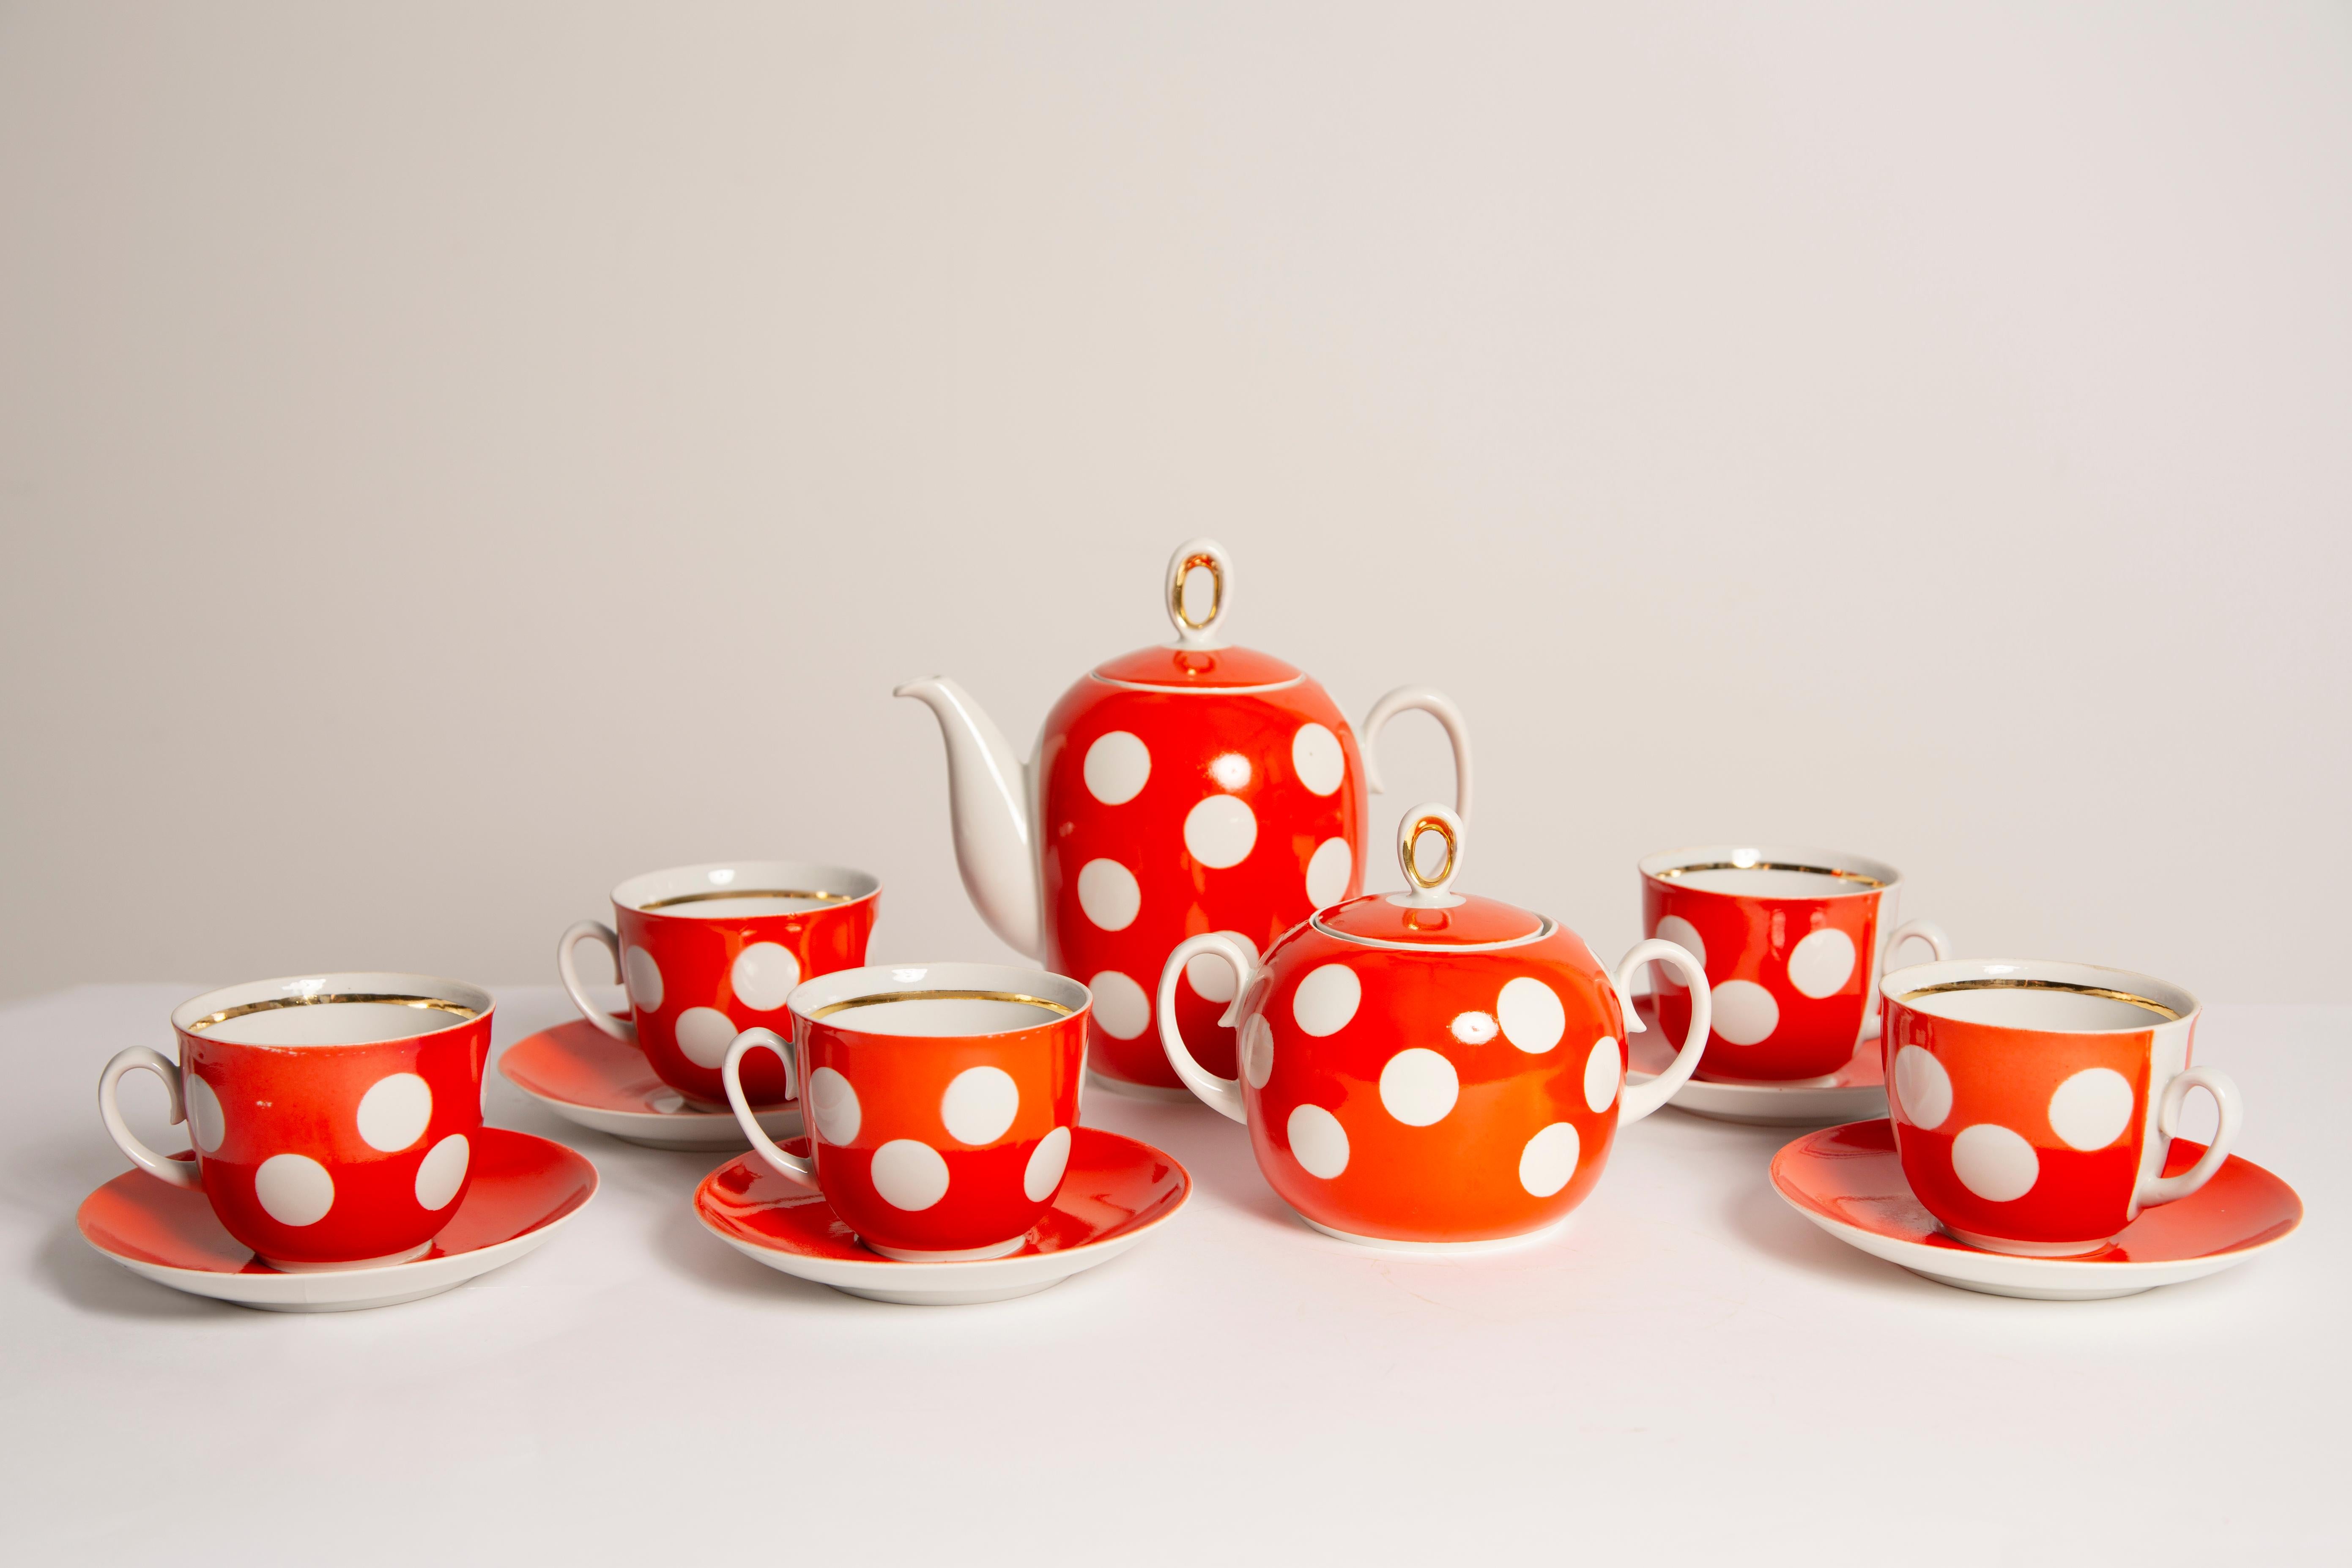 Midcentury Porcelain Red Dots Tea Coffee Service Jug and Cups, Poland, 1960 For Sale 3